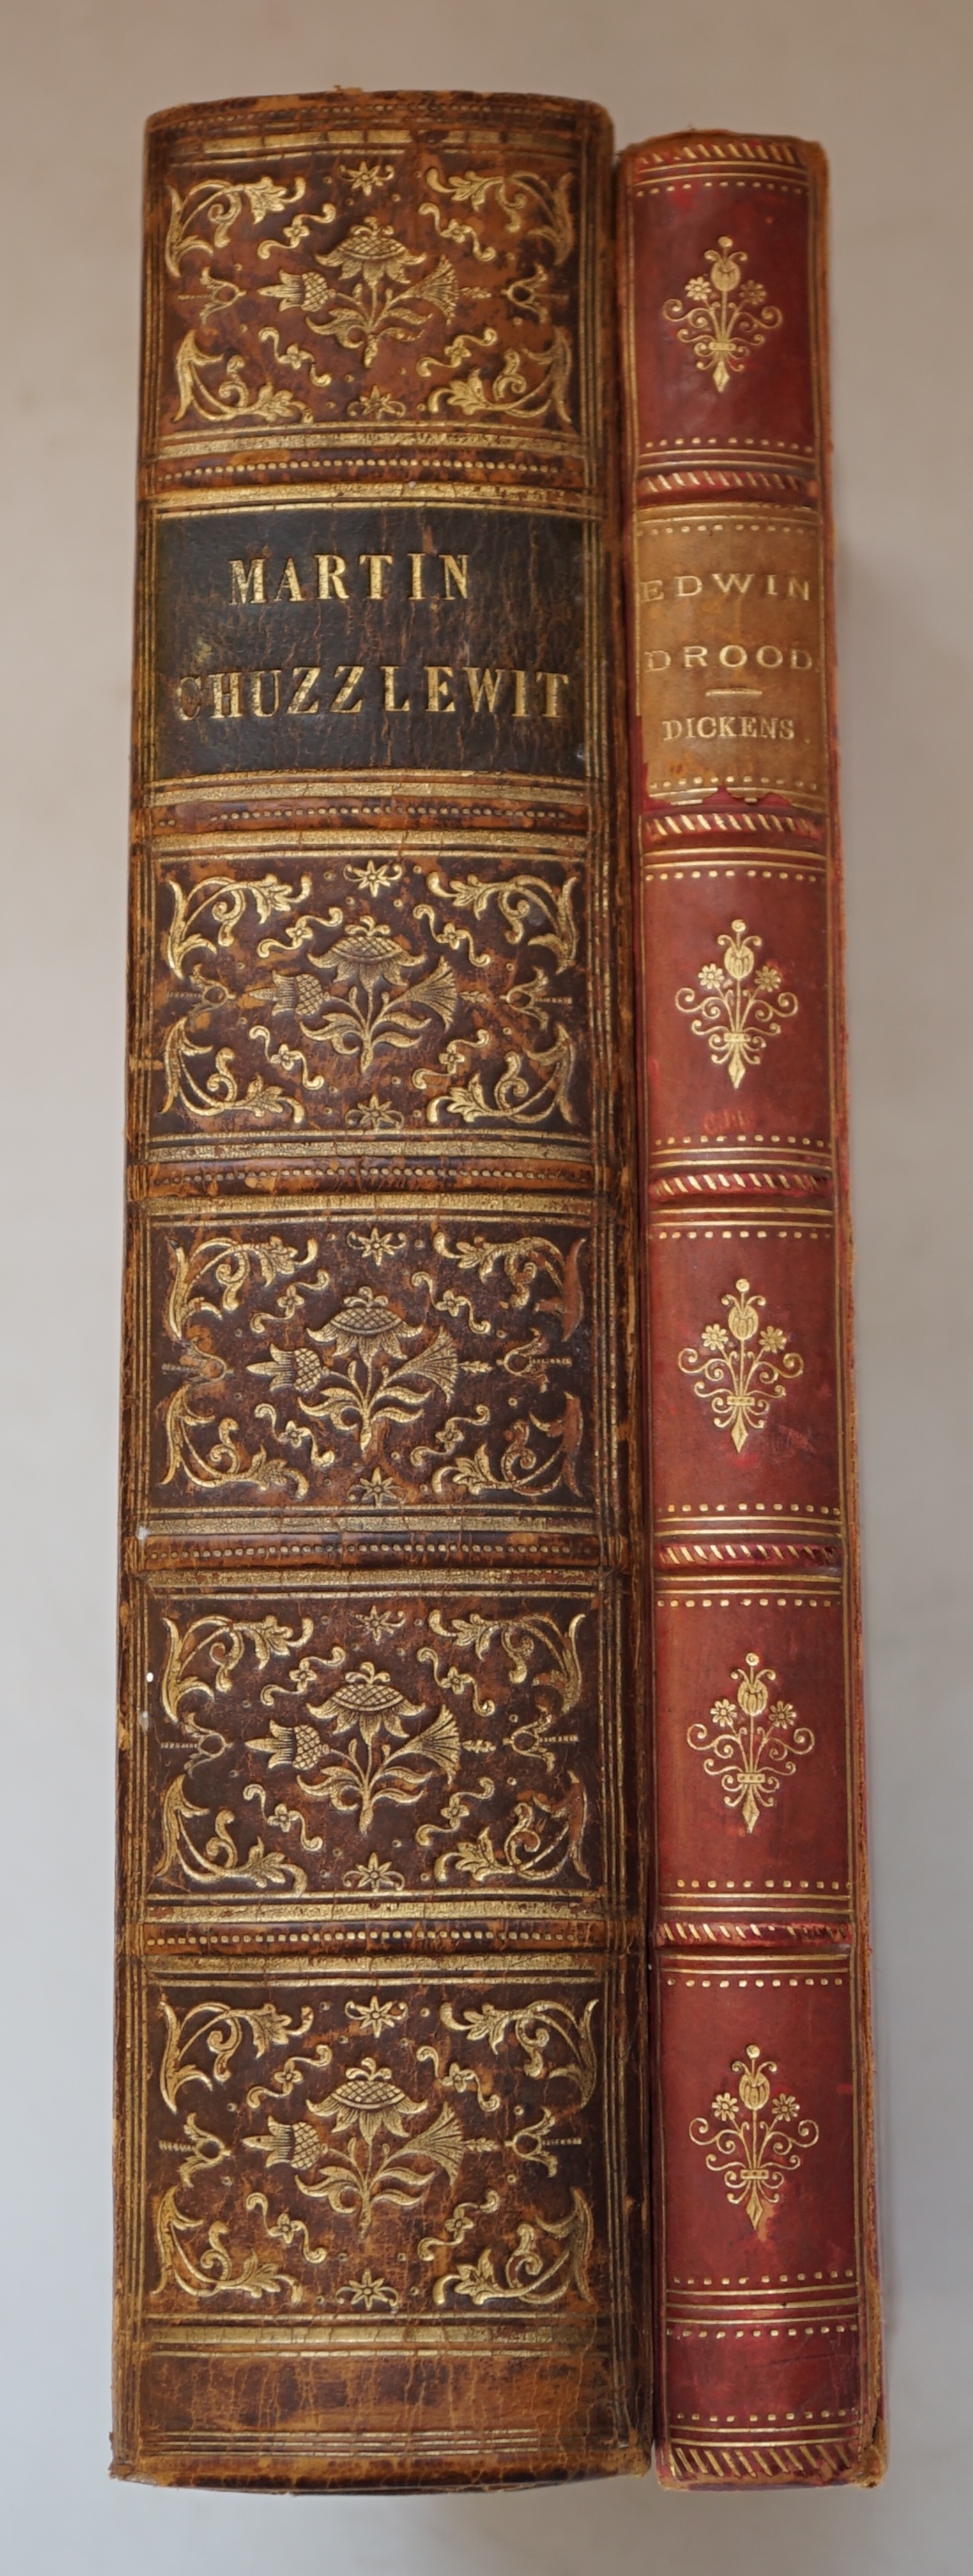 Dickens, Charles - The Mystery of Edwin Drood, 1st edition in book form, engraved portrait frontispiece, additional title and 12 plates by Luke Fildes, without 1p. list of Dickens' works and 32pp. catalogue at rear, 8vo,